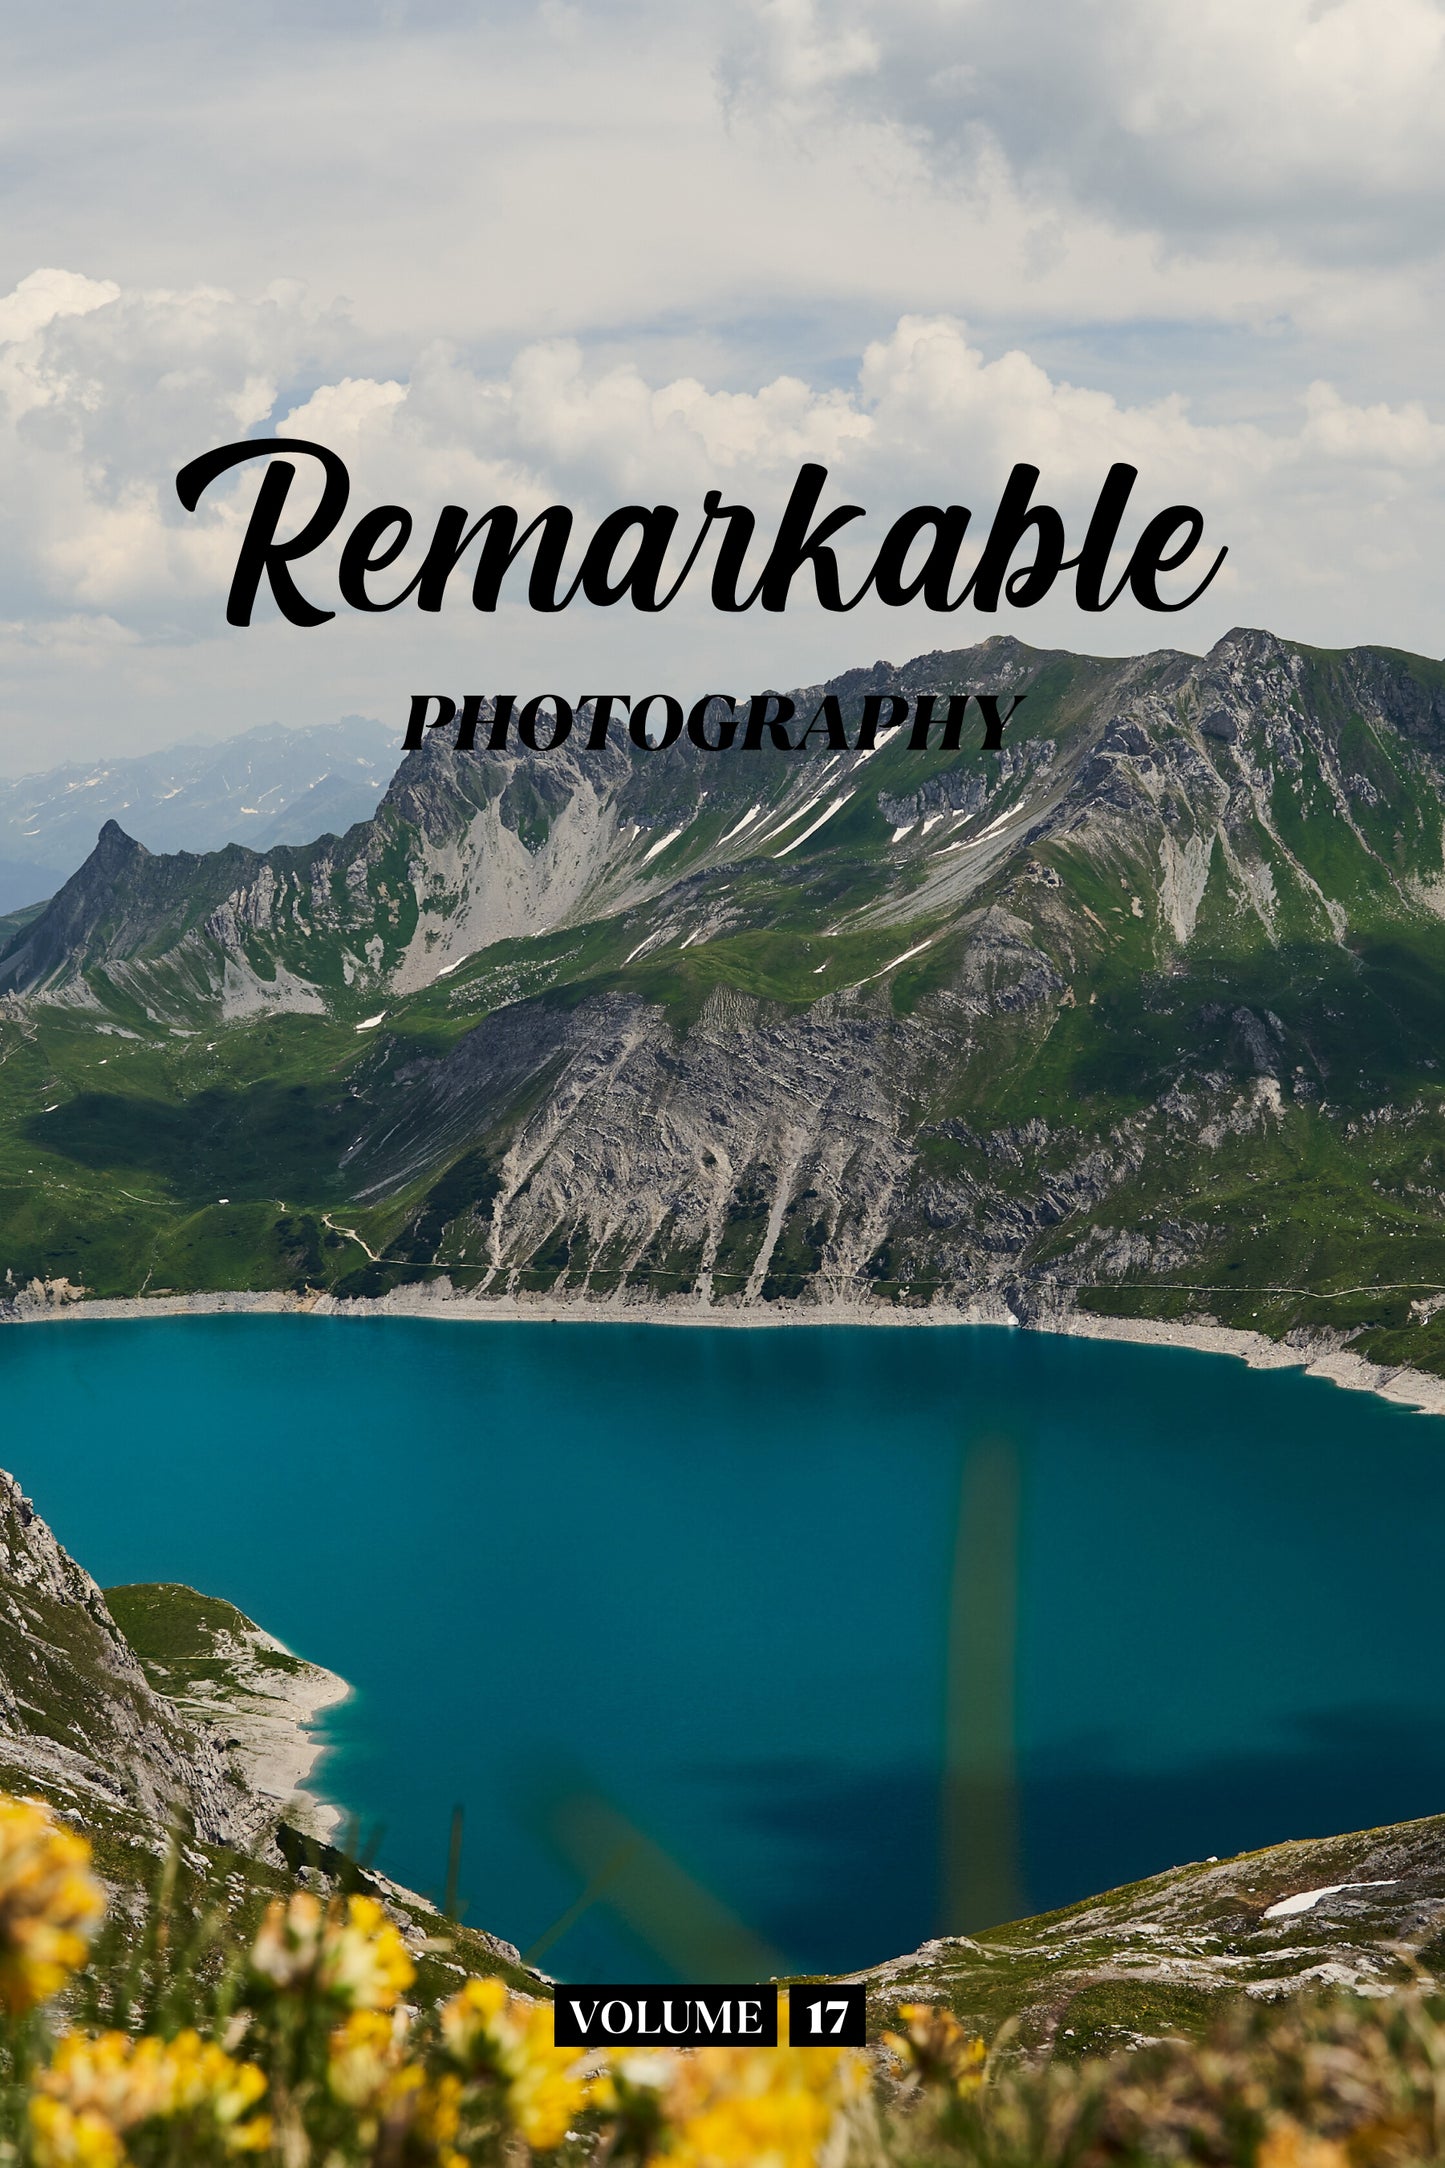 Remarkable Photography Volume 17 (Physical Book)